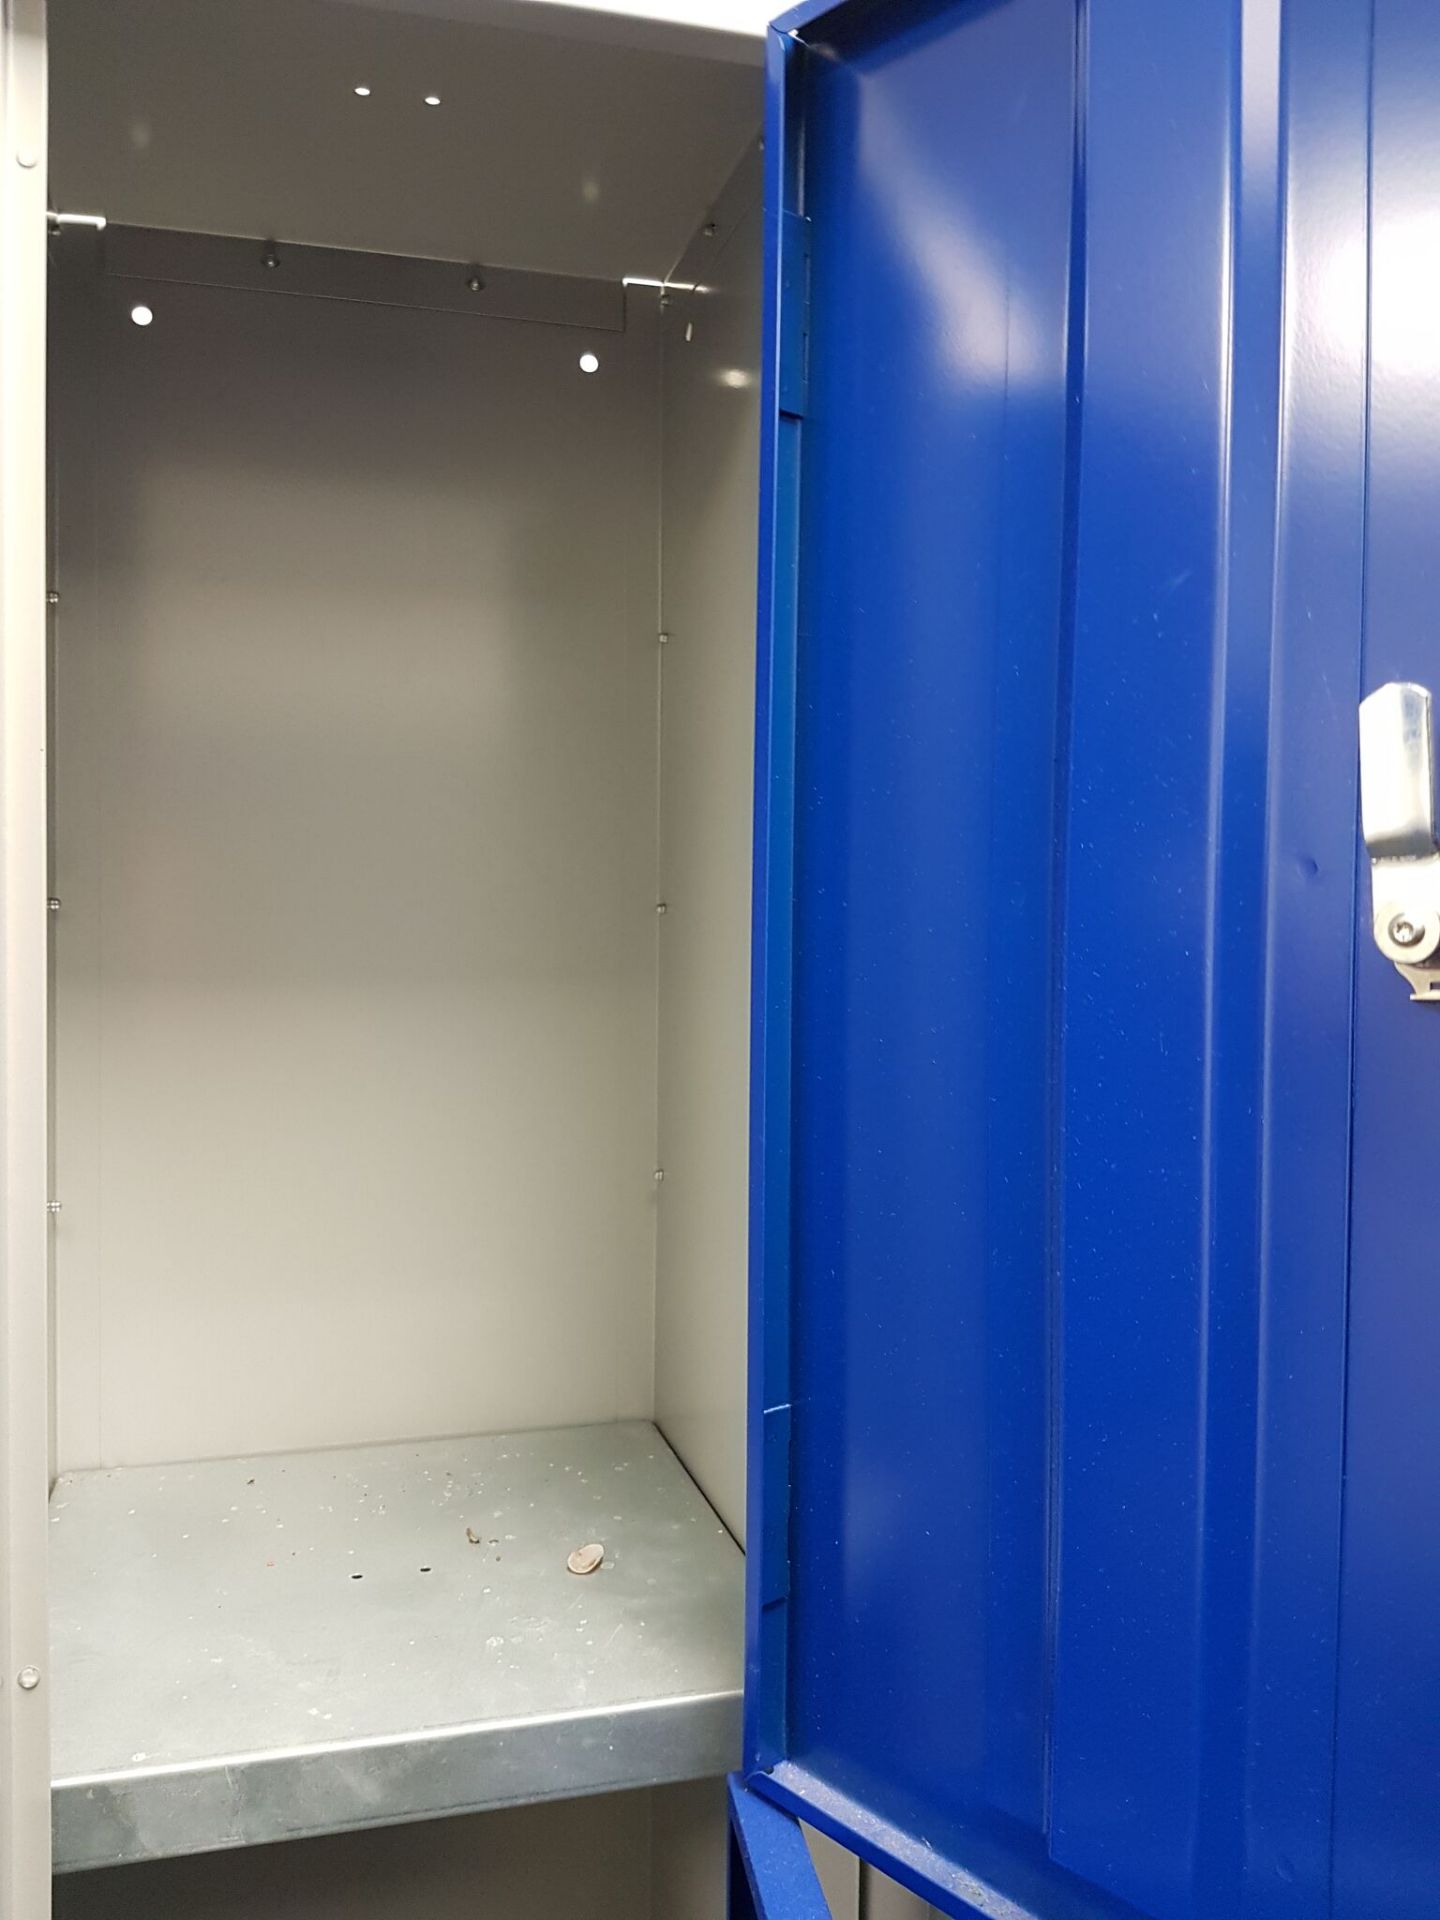 4 x Elite 3 Door Staff Clothes Lockers - Features Padlock Fittings, Welded and Riveted Steel - Image 6 of 6